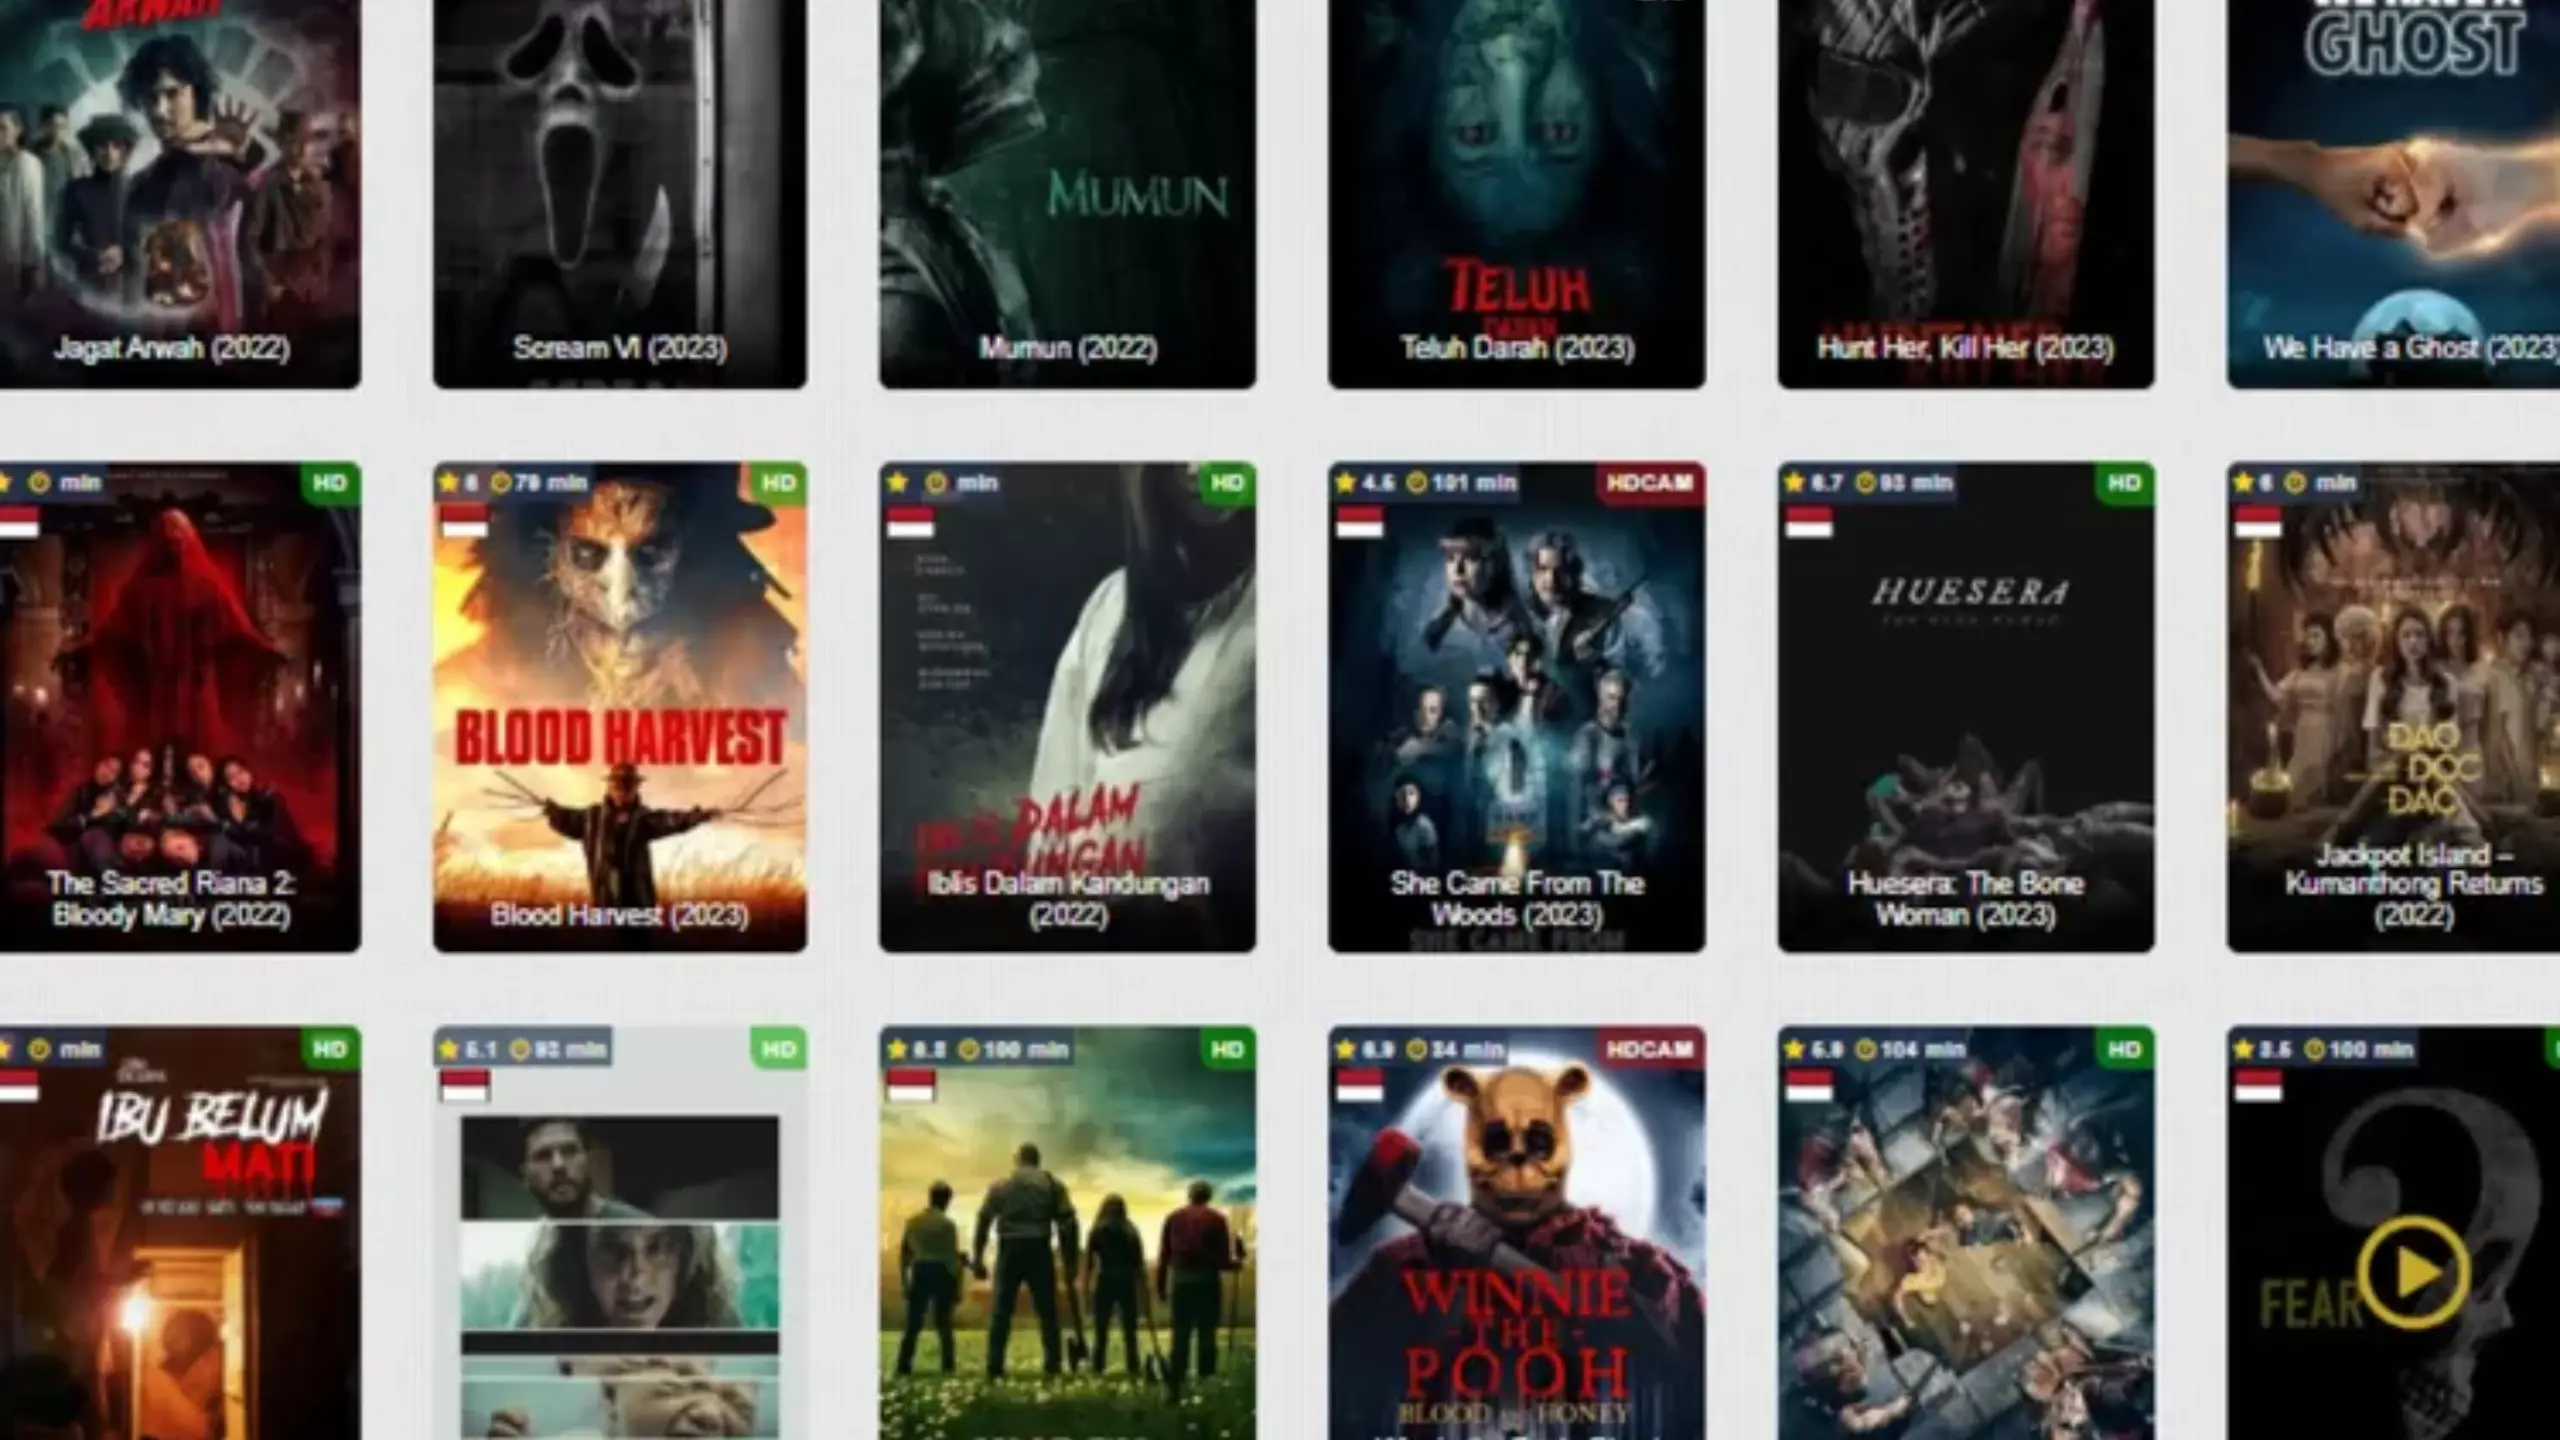 Rebahin A Website for Streaming and Downloading Movies Online